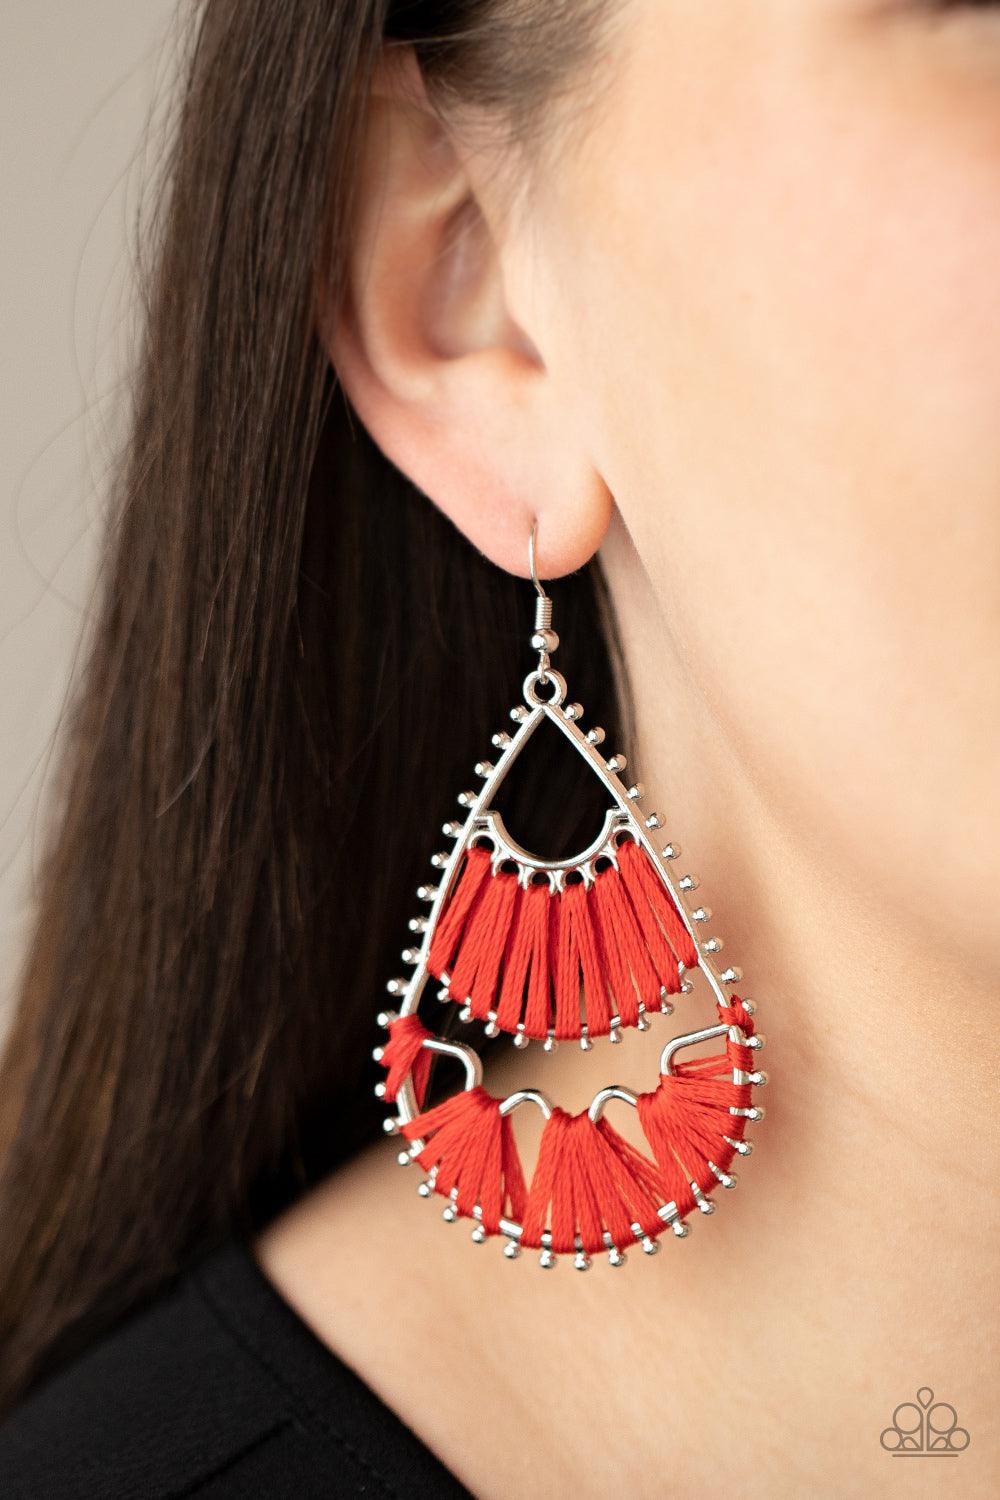 Paparazzi Accessories Samba Scene - Red Three abstract silver fittings section off the inside of a pronged teardrop. Red thread is wrapped around the bar-like fittings, creating colorful loom-like accents. Earring attaches to a standard fishhook fitting.